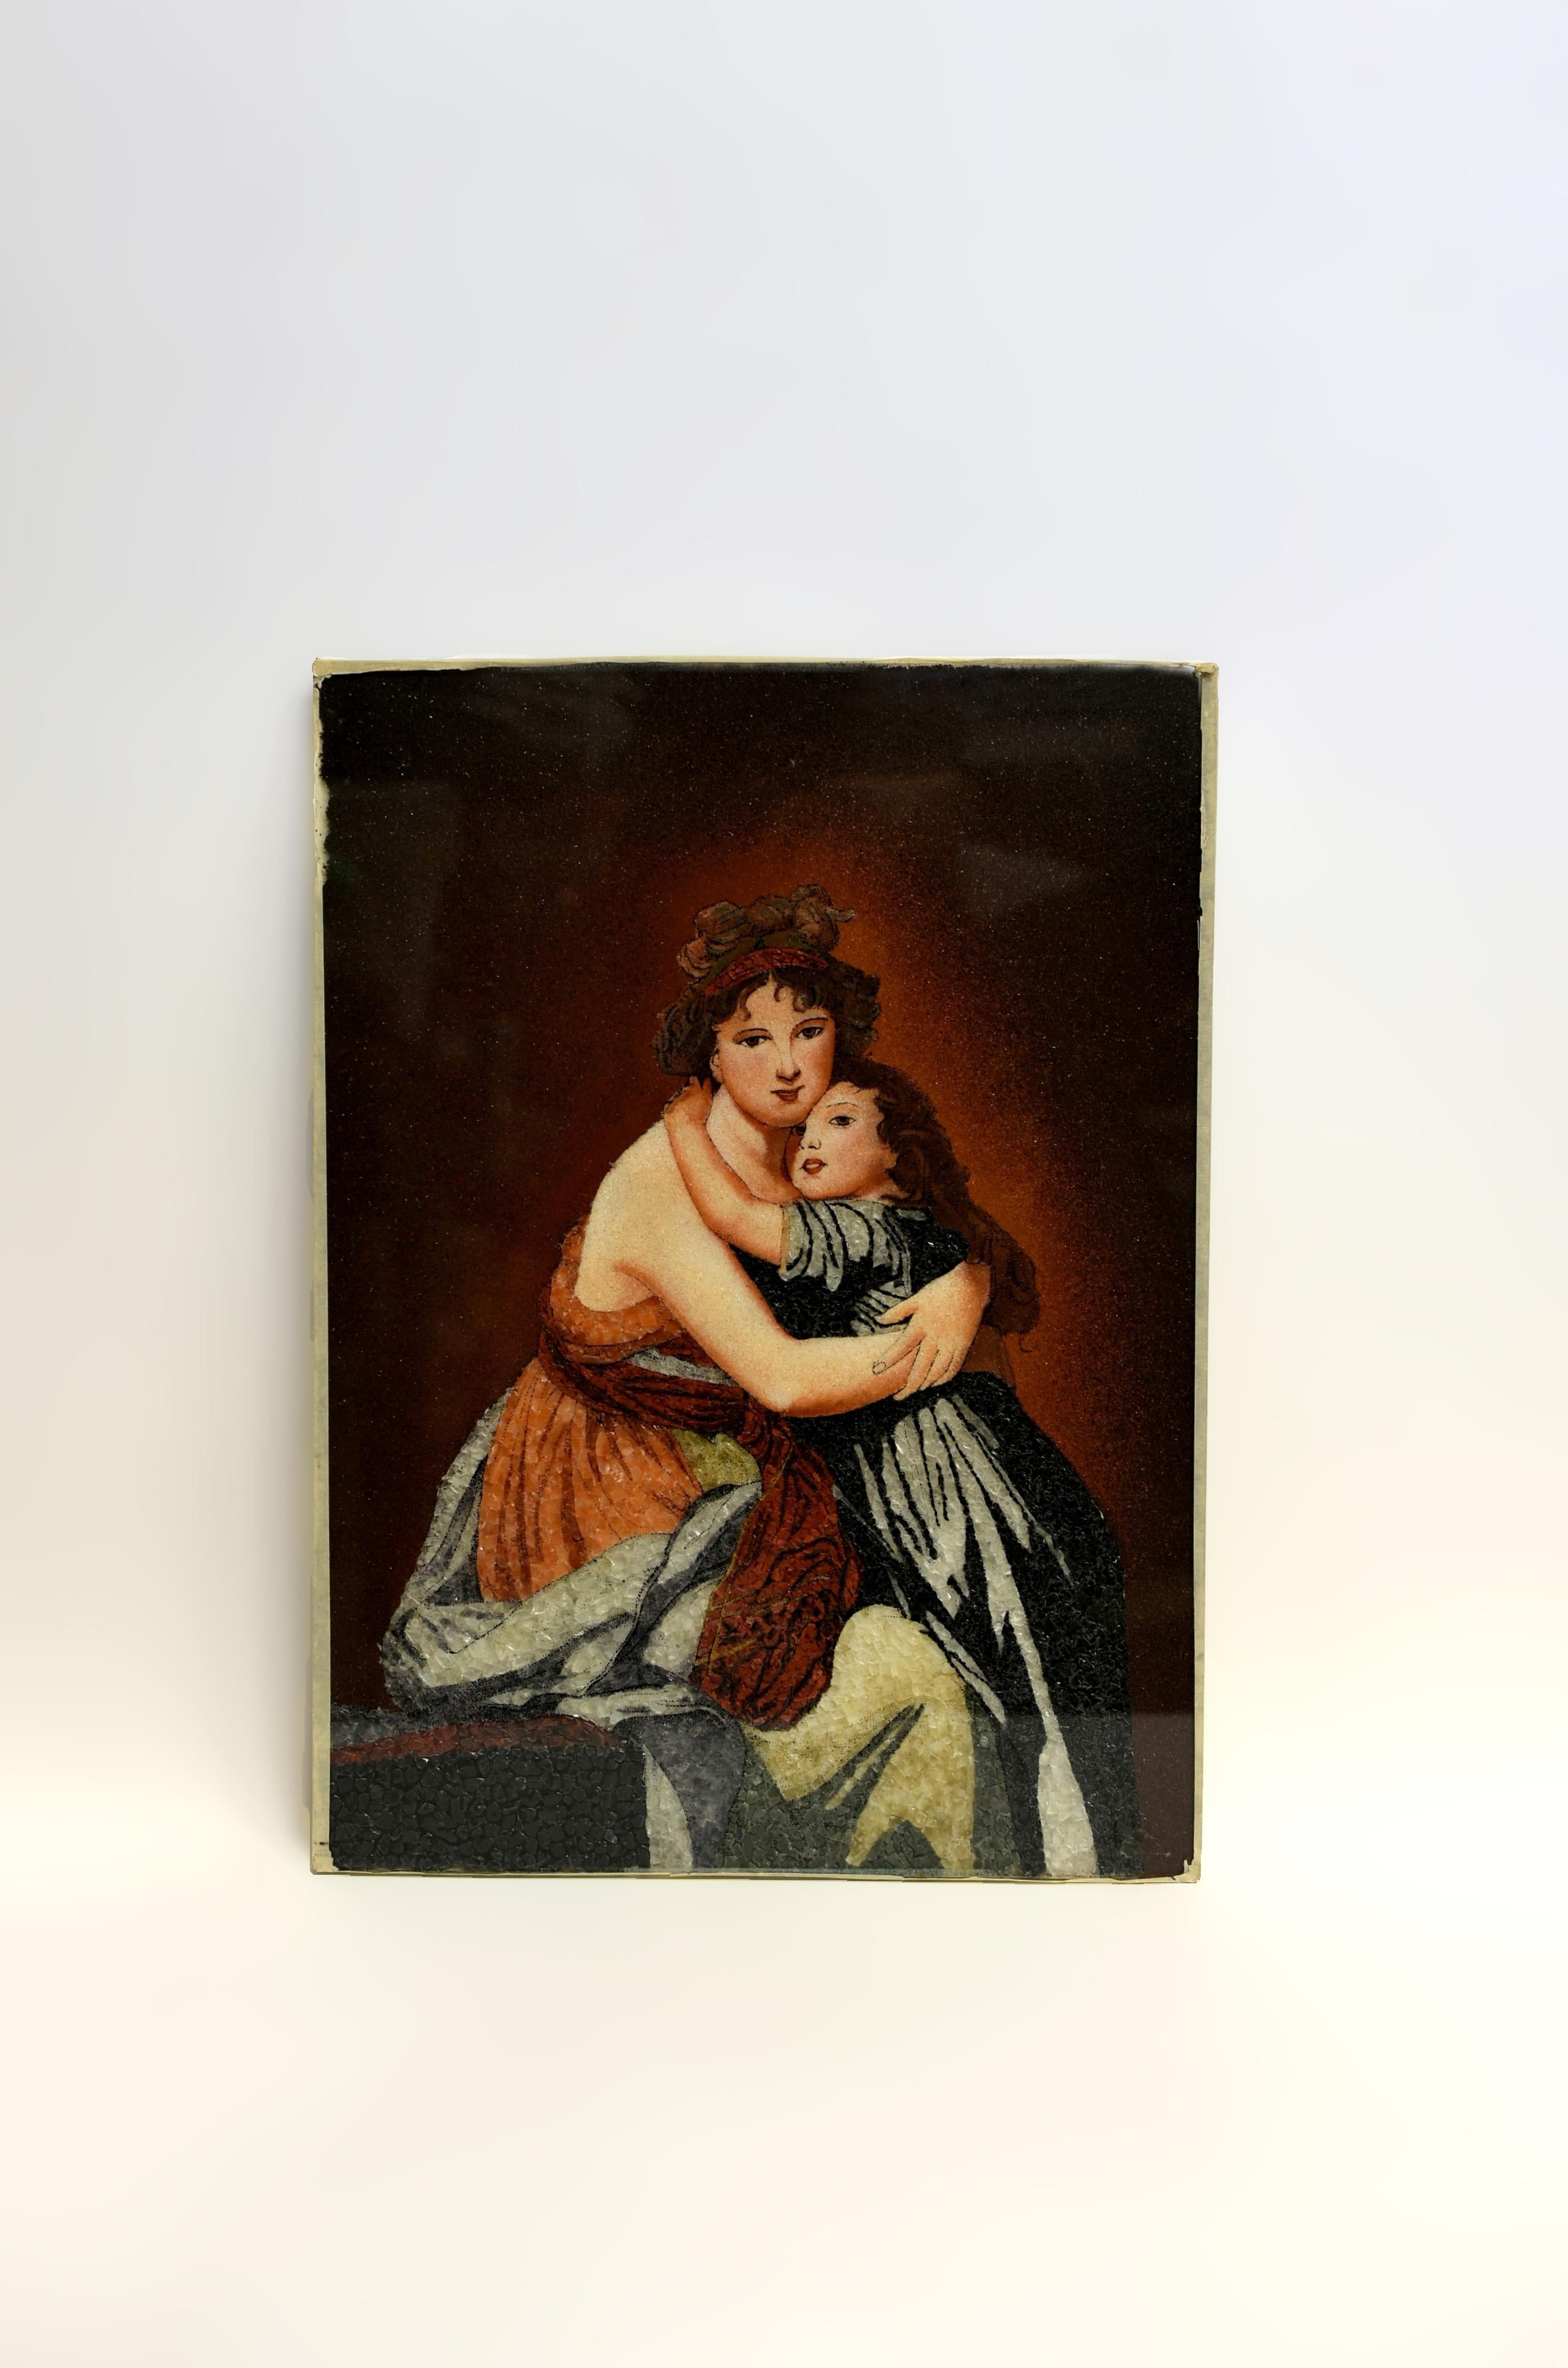 A gem studded masterpiece, modeled after Elisabeth Vigee Le Brun's 18th century self portrait with her daughter Julie, depicting the timeless bond between mother and child. Executed on the reverse of glass and embellished with quartz to create a